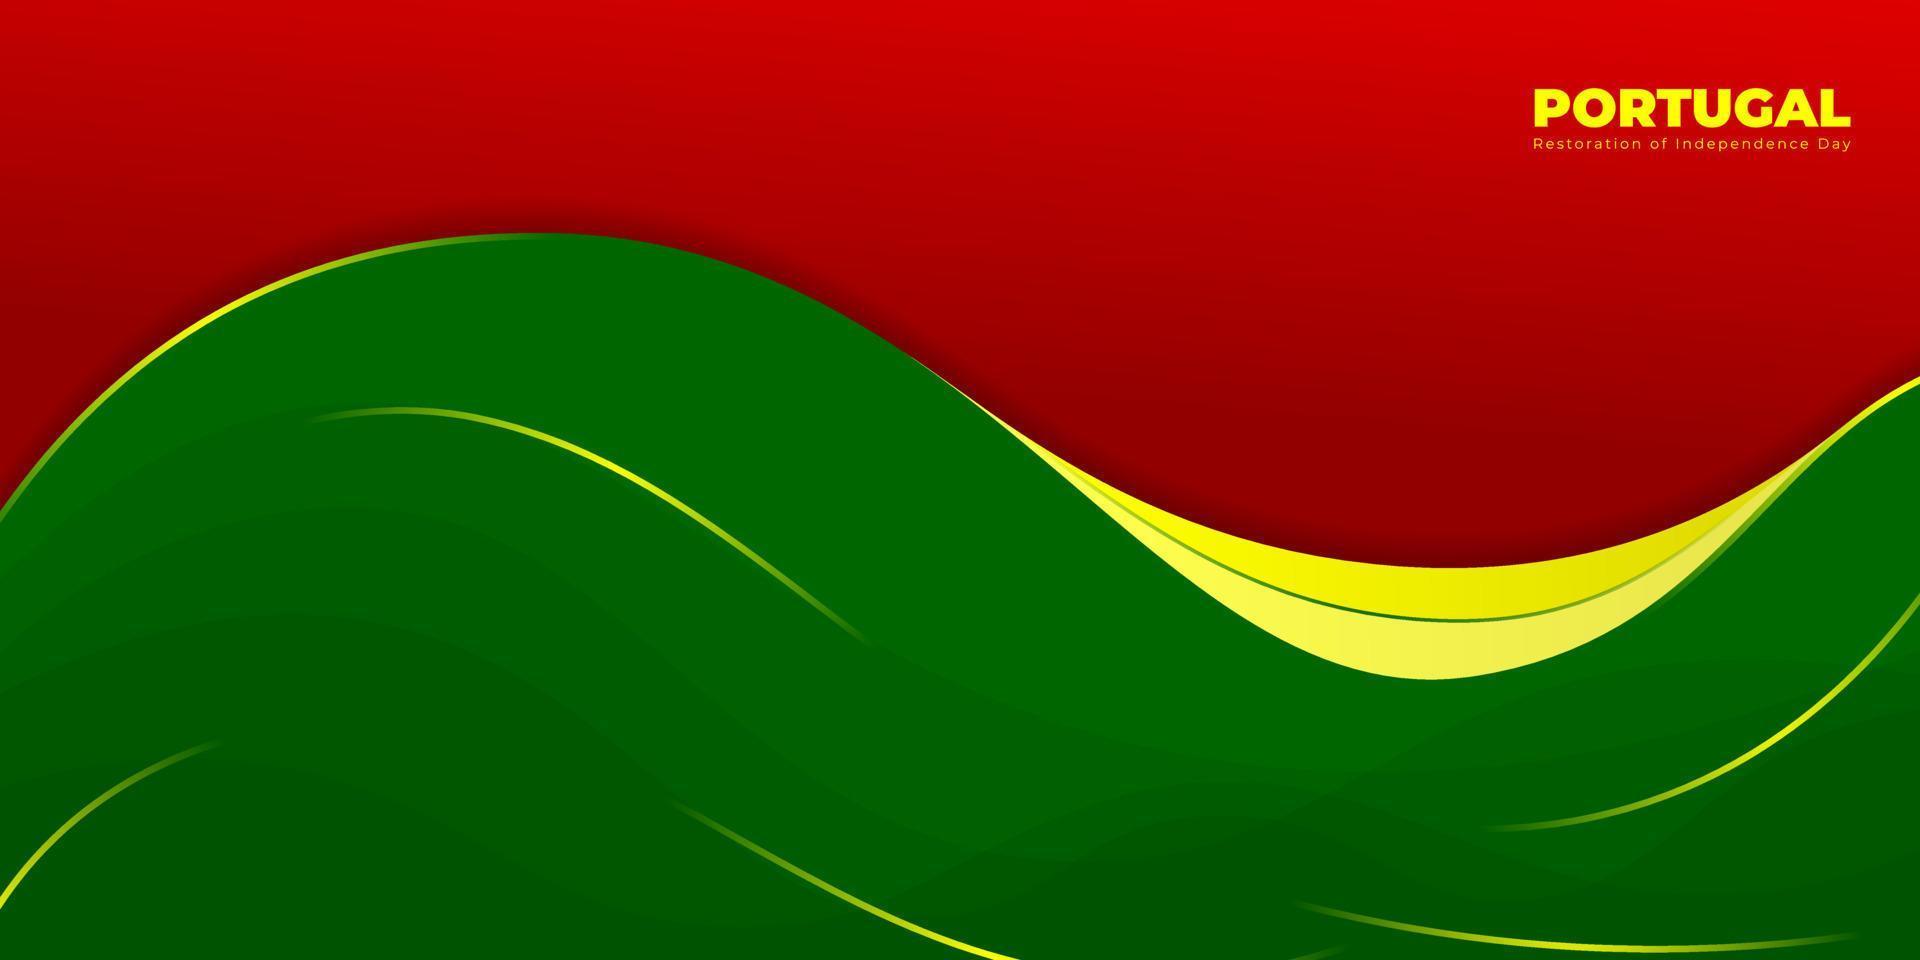 Waving Red and green abstract background with yellow lines design. Portugal restoration independence day template design. vector